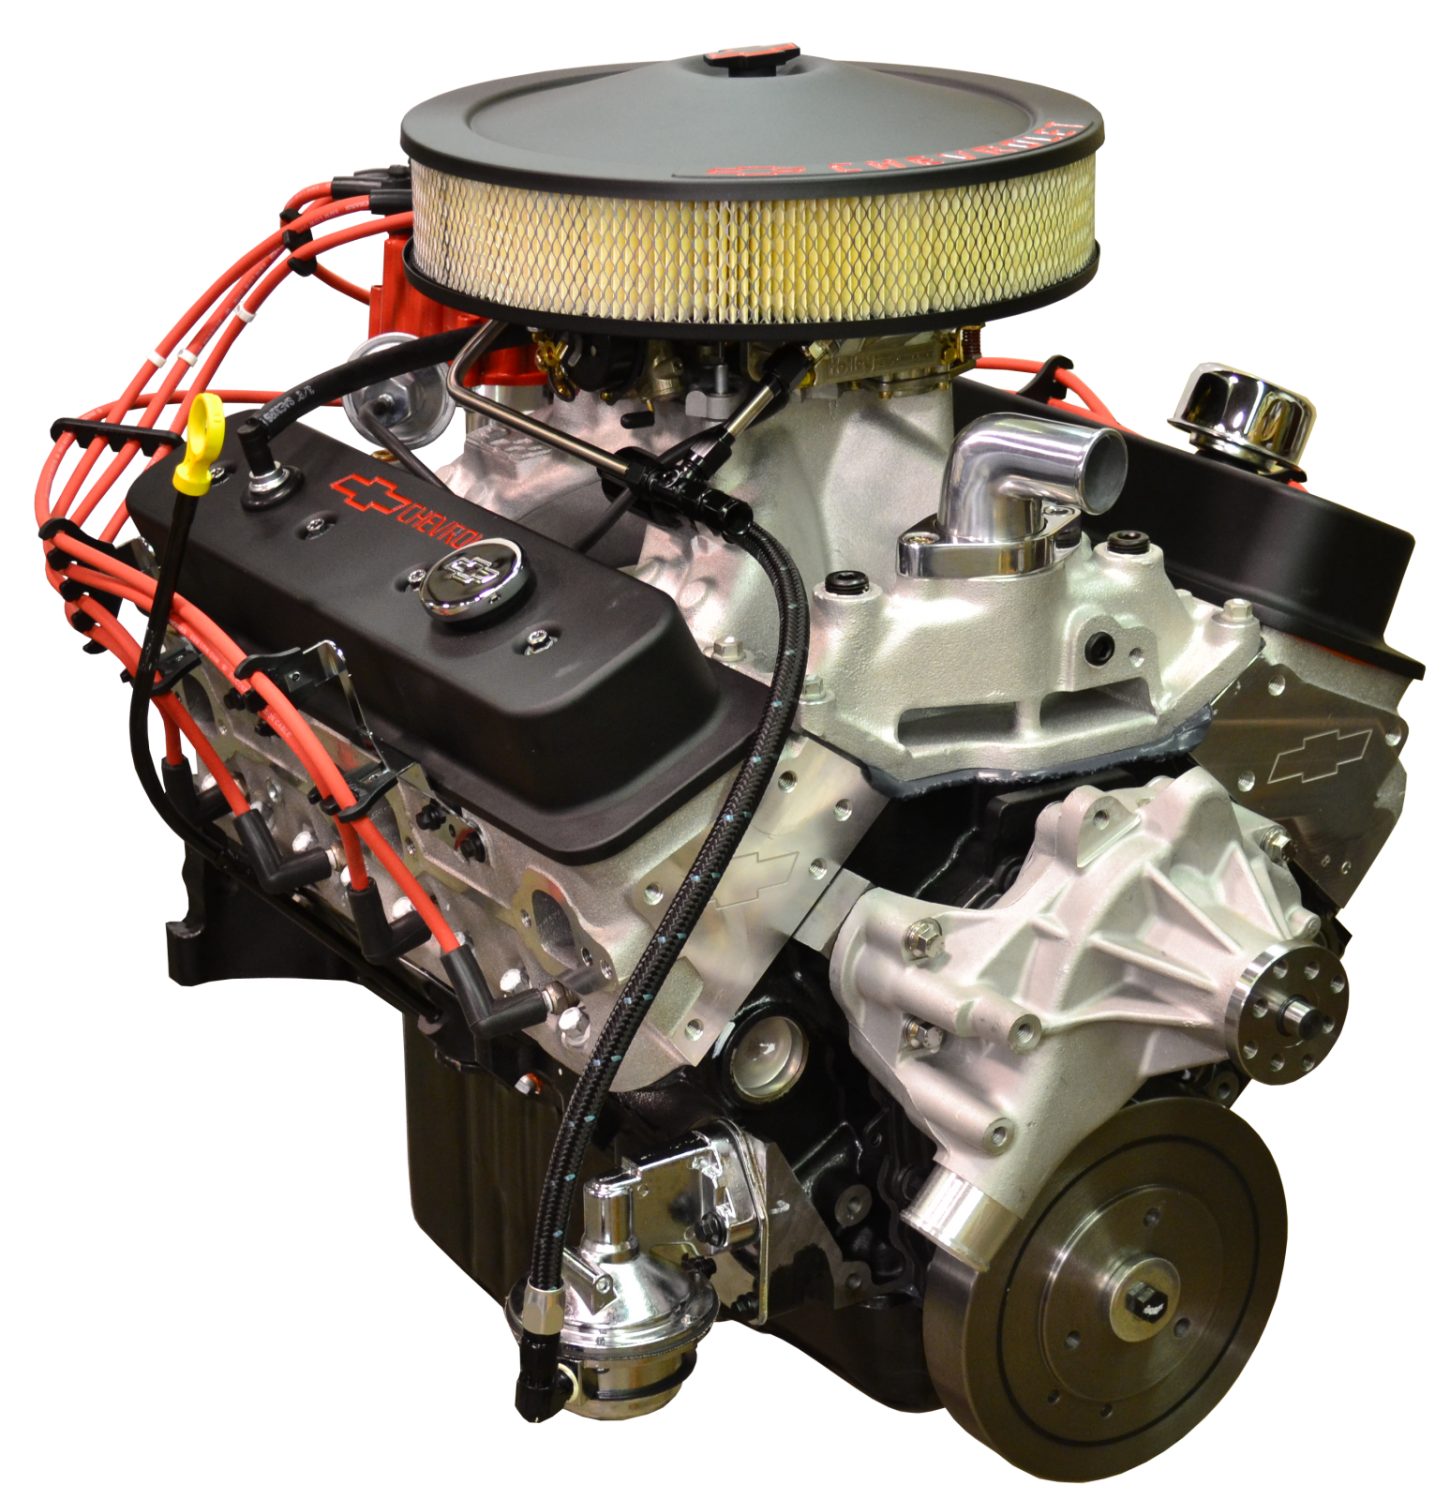 Small Block Crate Engine By Pace Performance Sp3 435hp Black Finish Efi Gmp 2fx